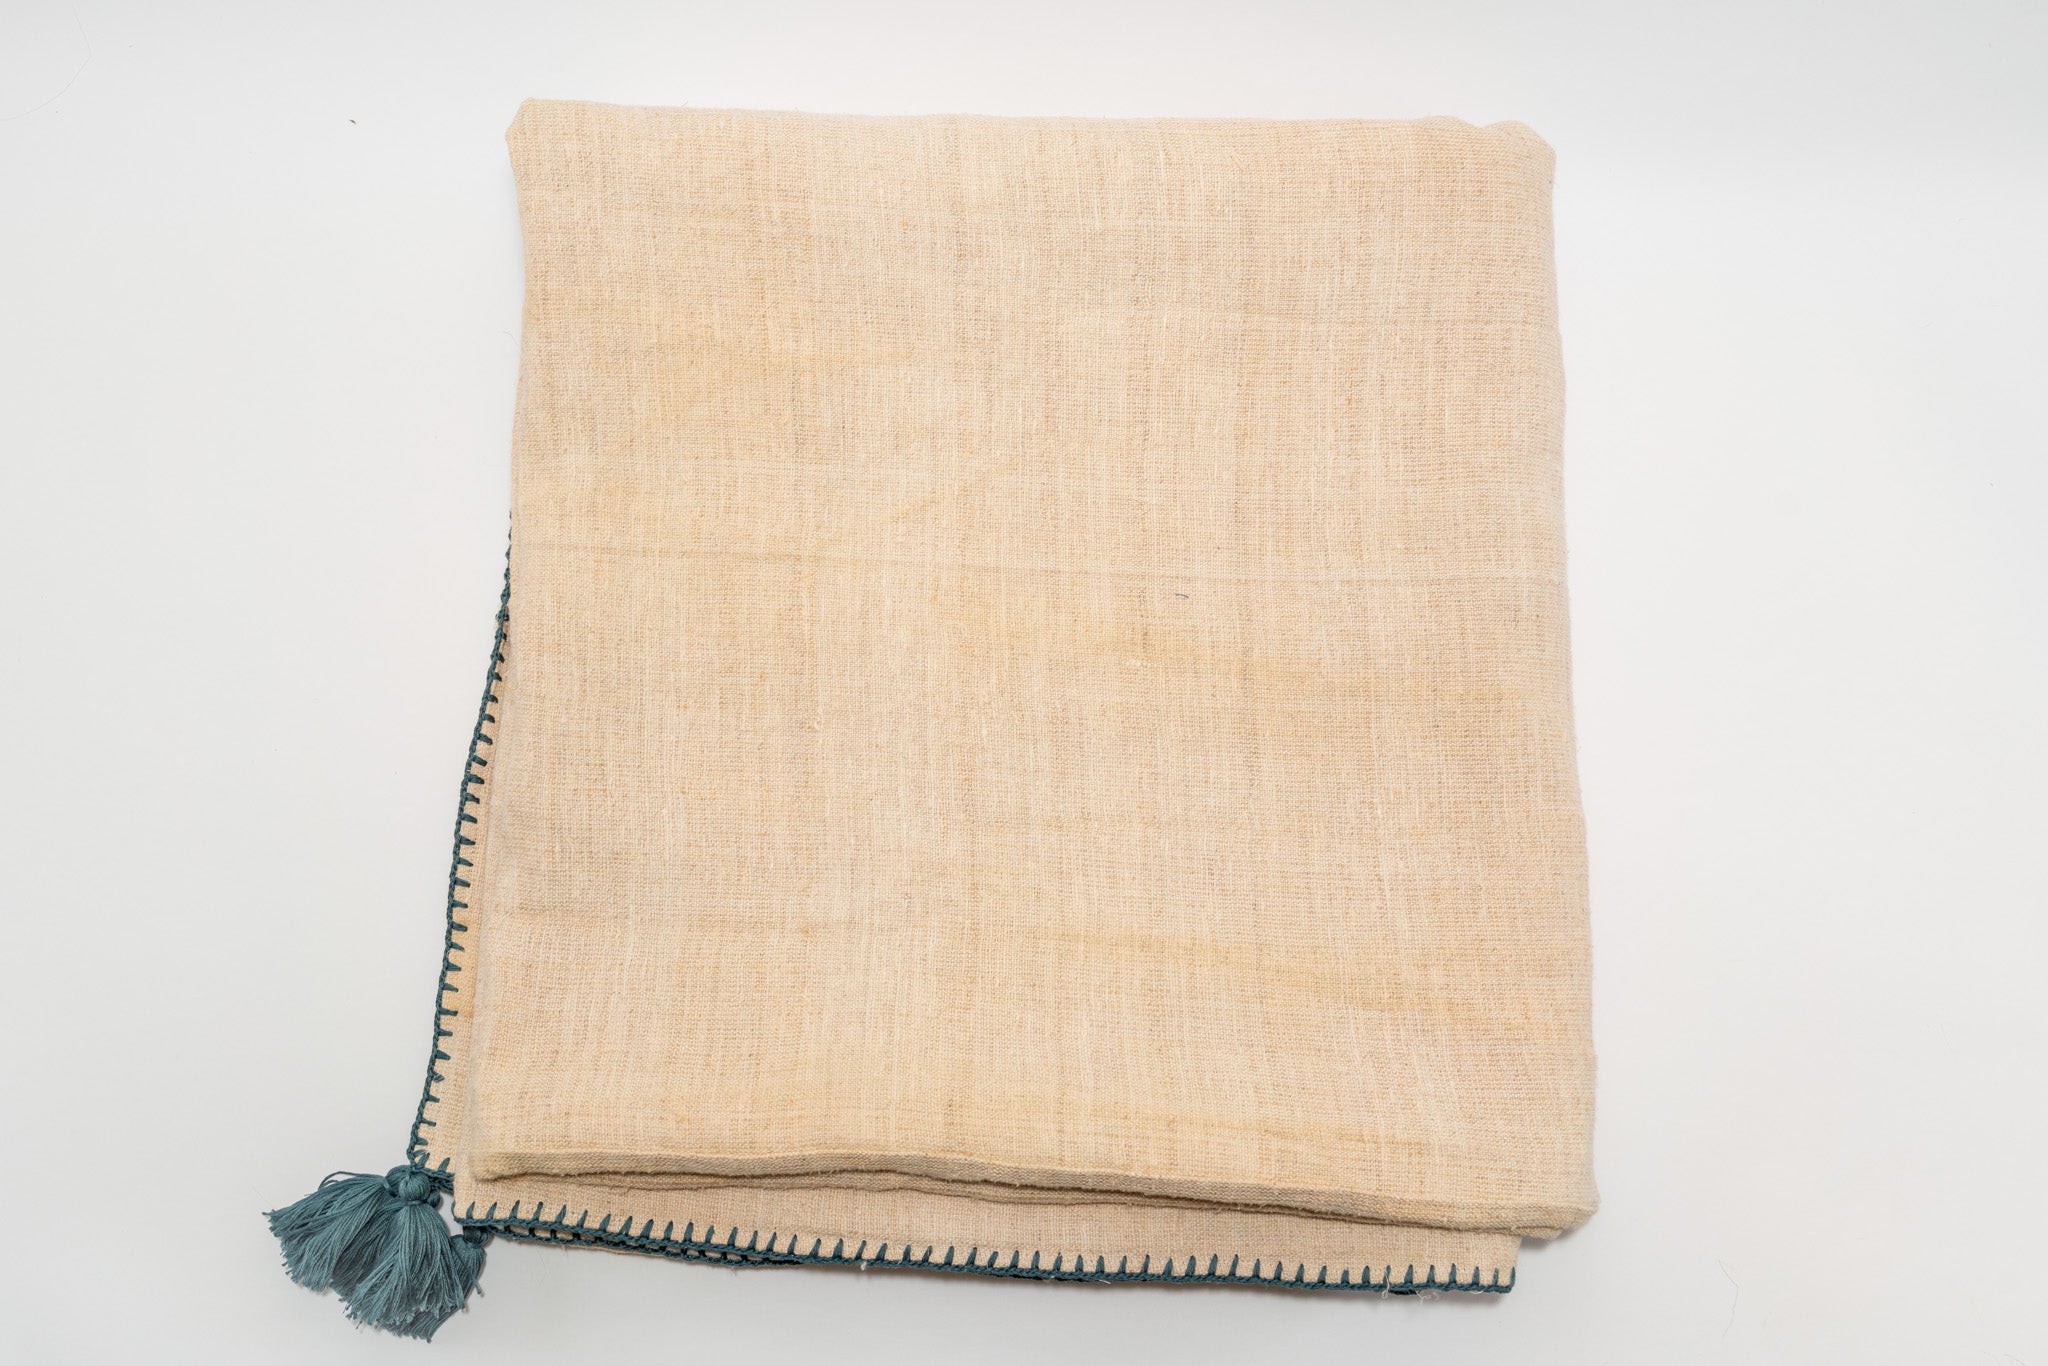 Bed Cover: Organic handwoven antique hemp, hand stitched edging - BC05